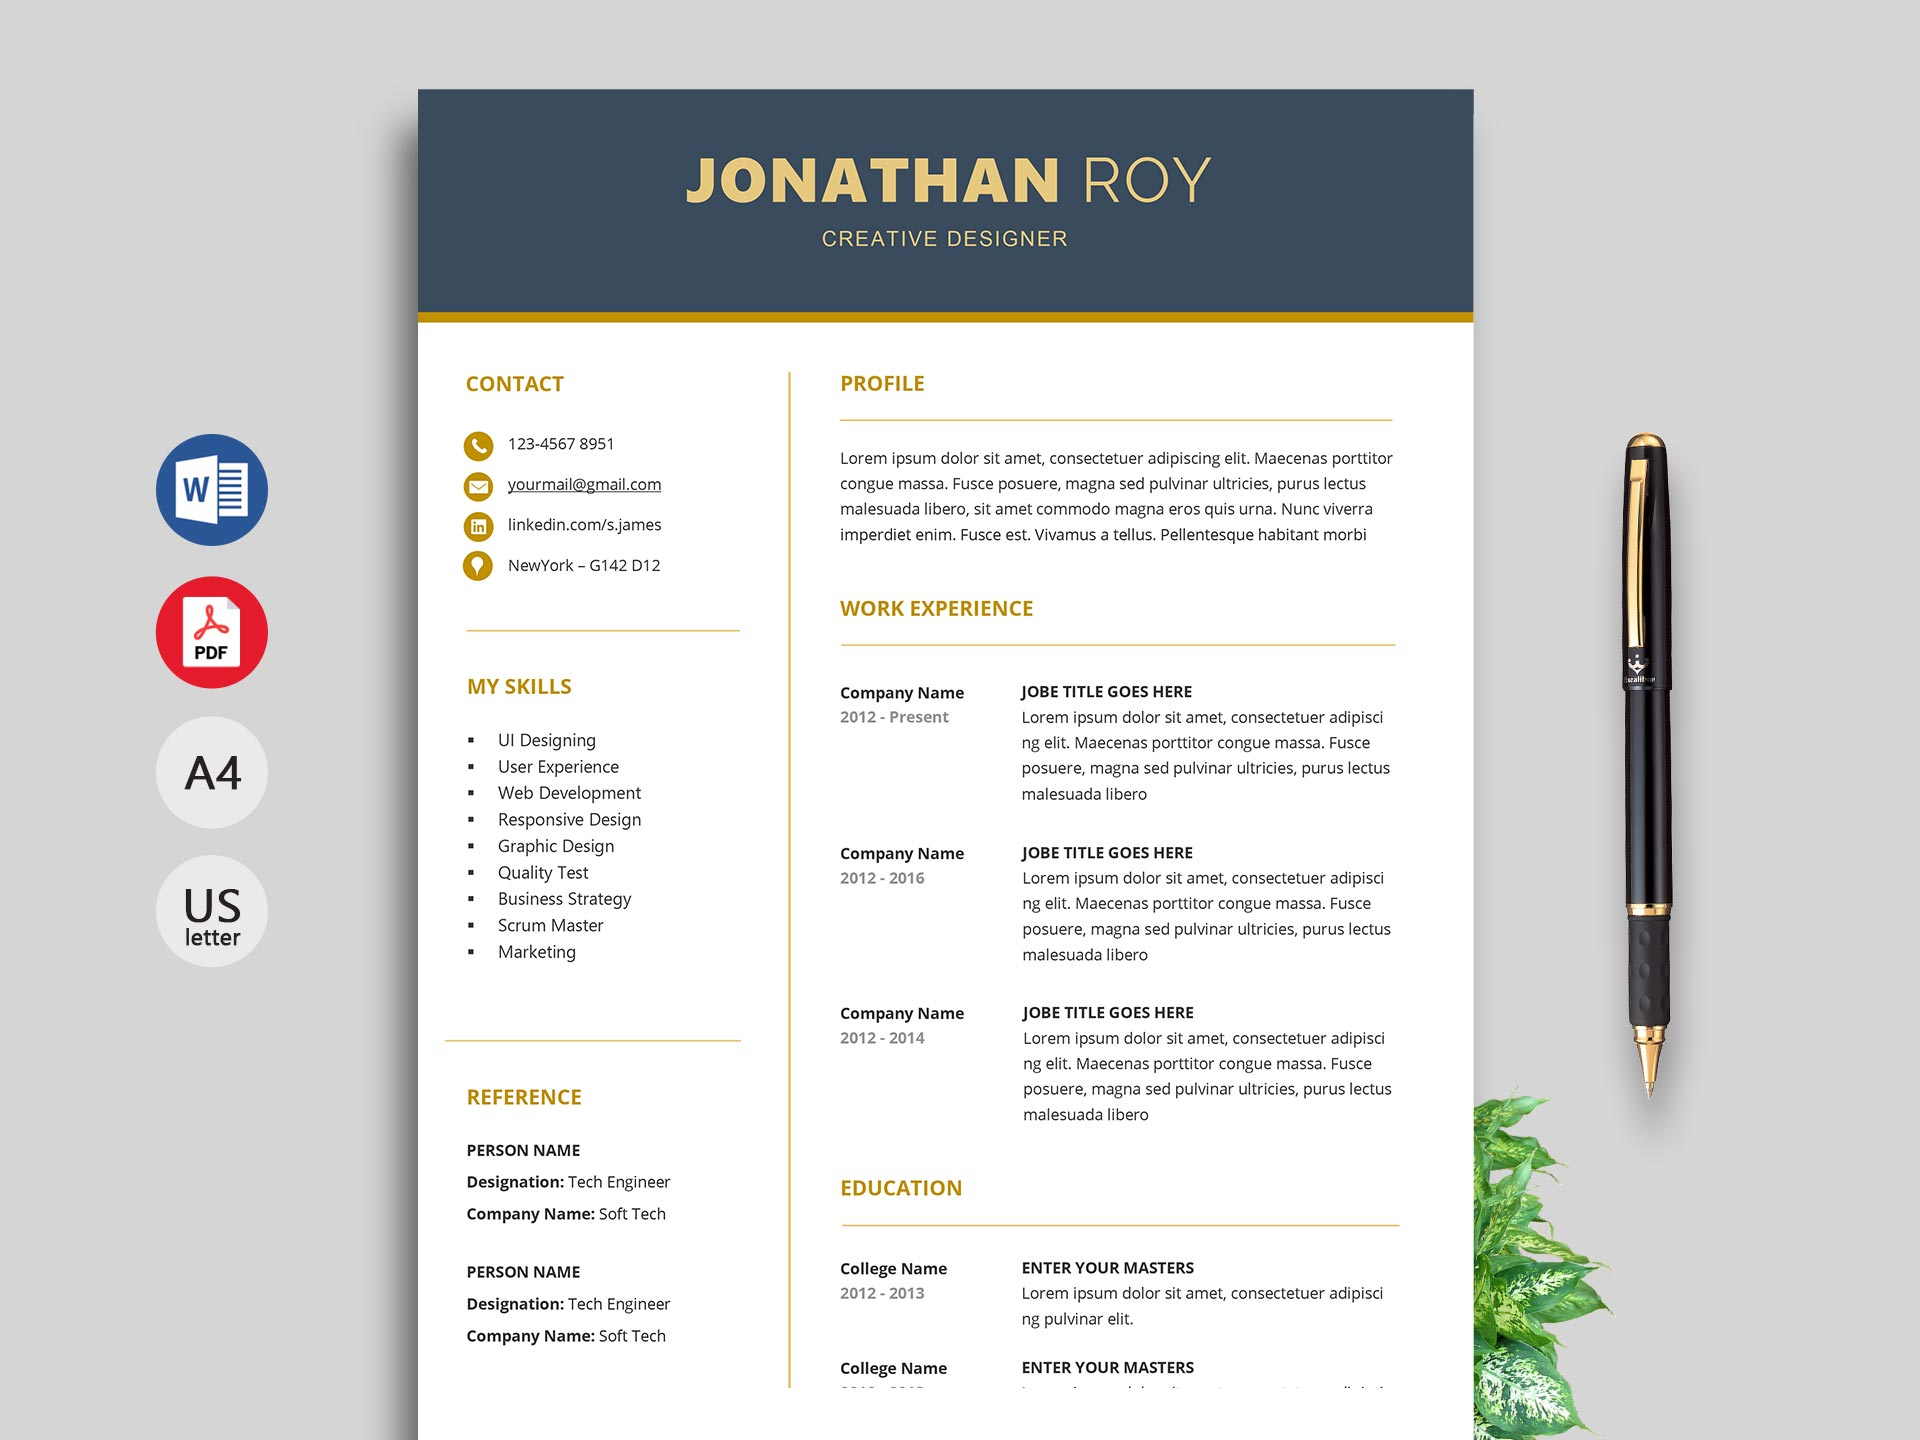 Free Resume & Cv Templates In Word Format 2020 | Resumekraft In How To Create A Cv Template In Word